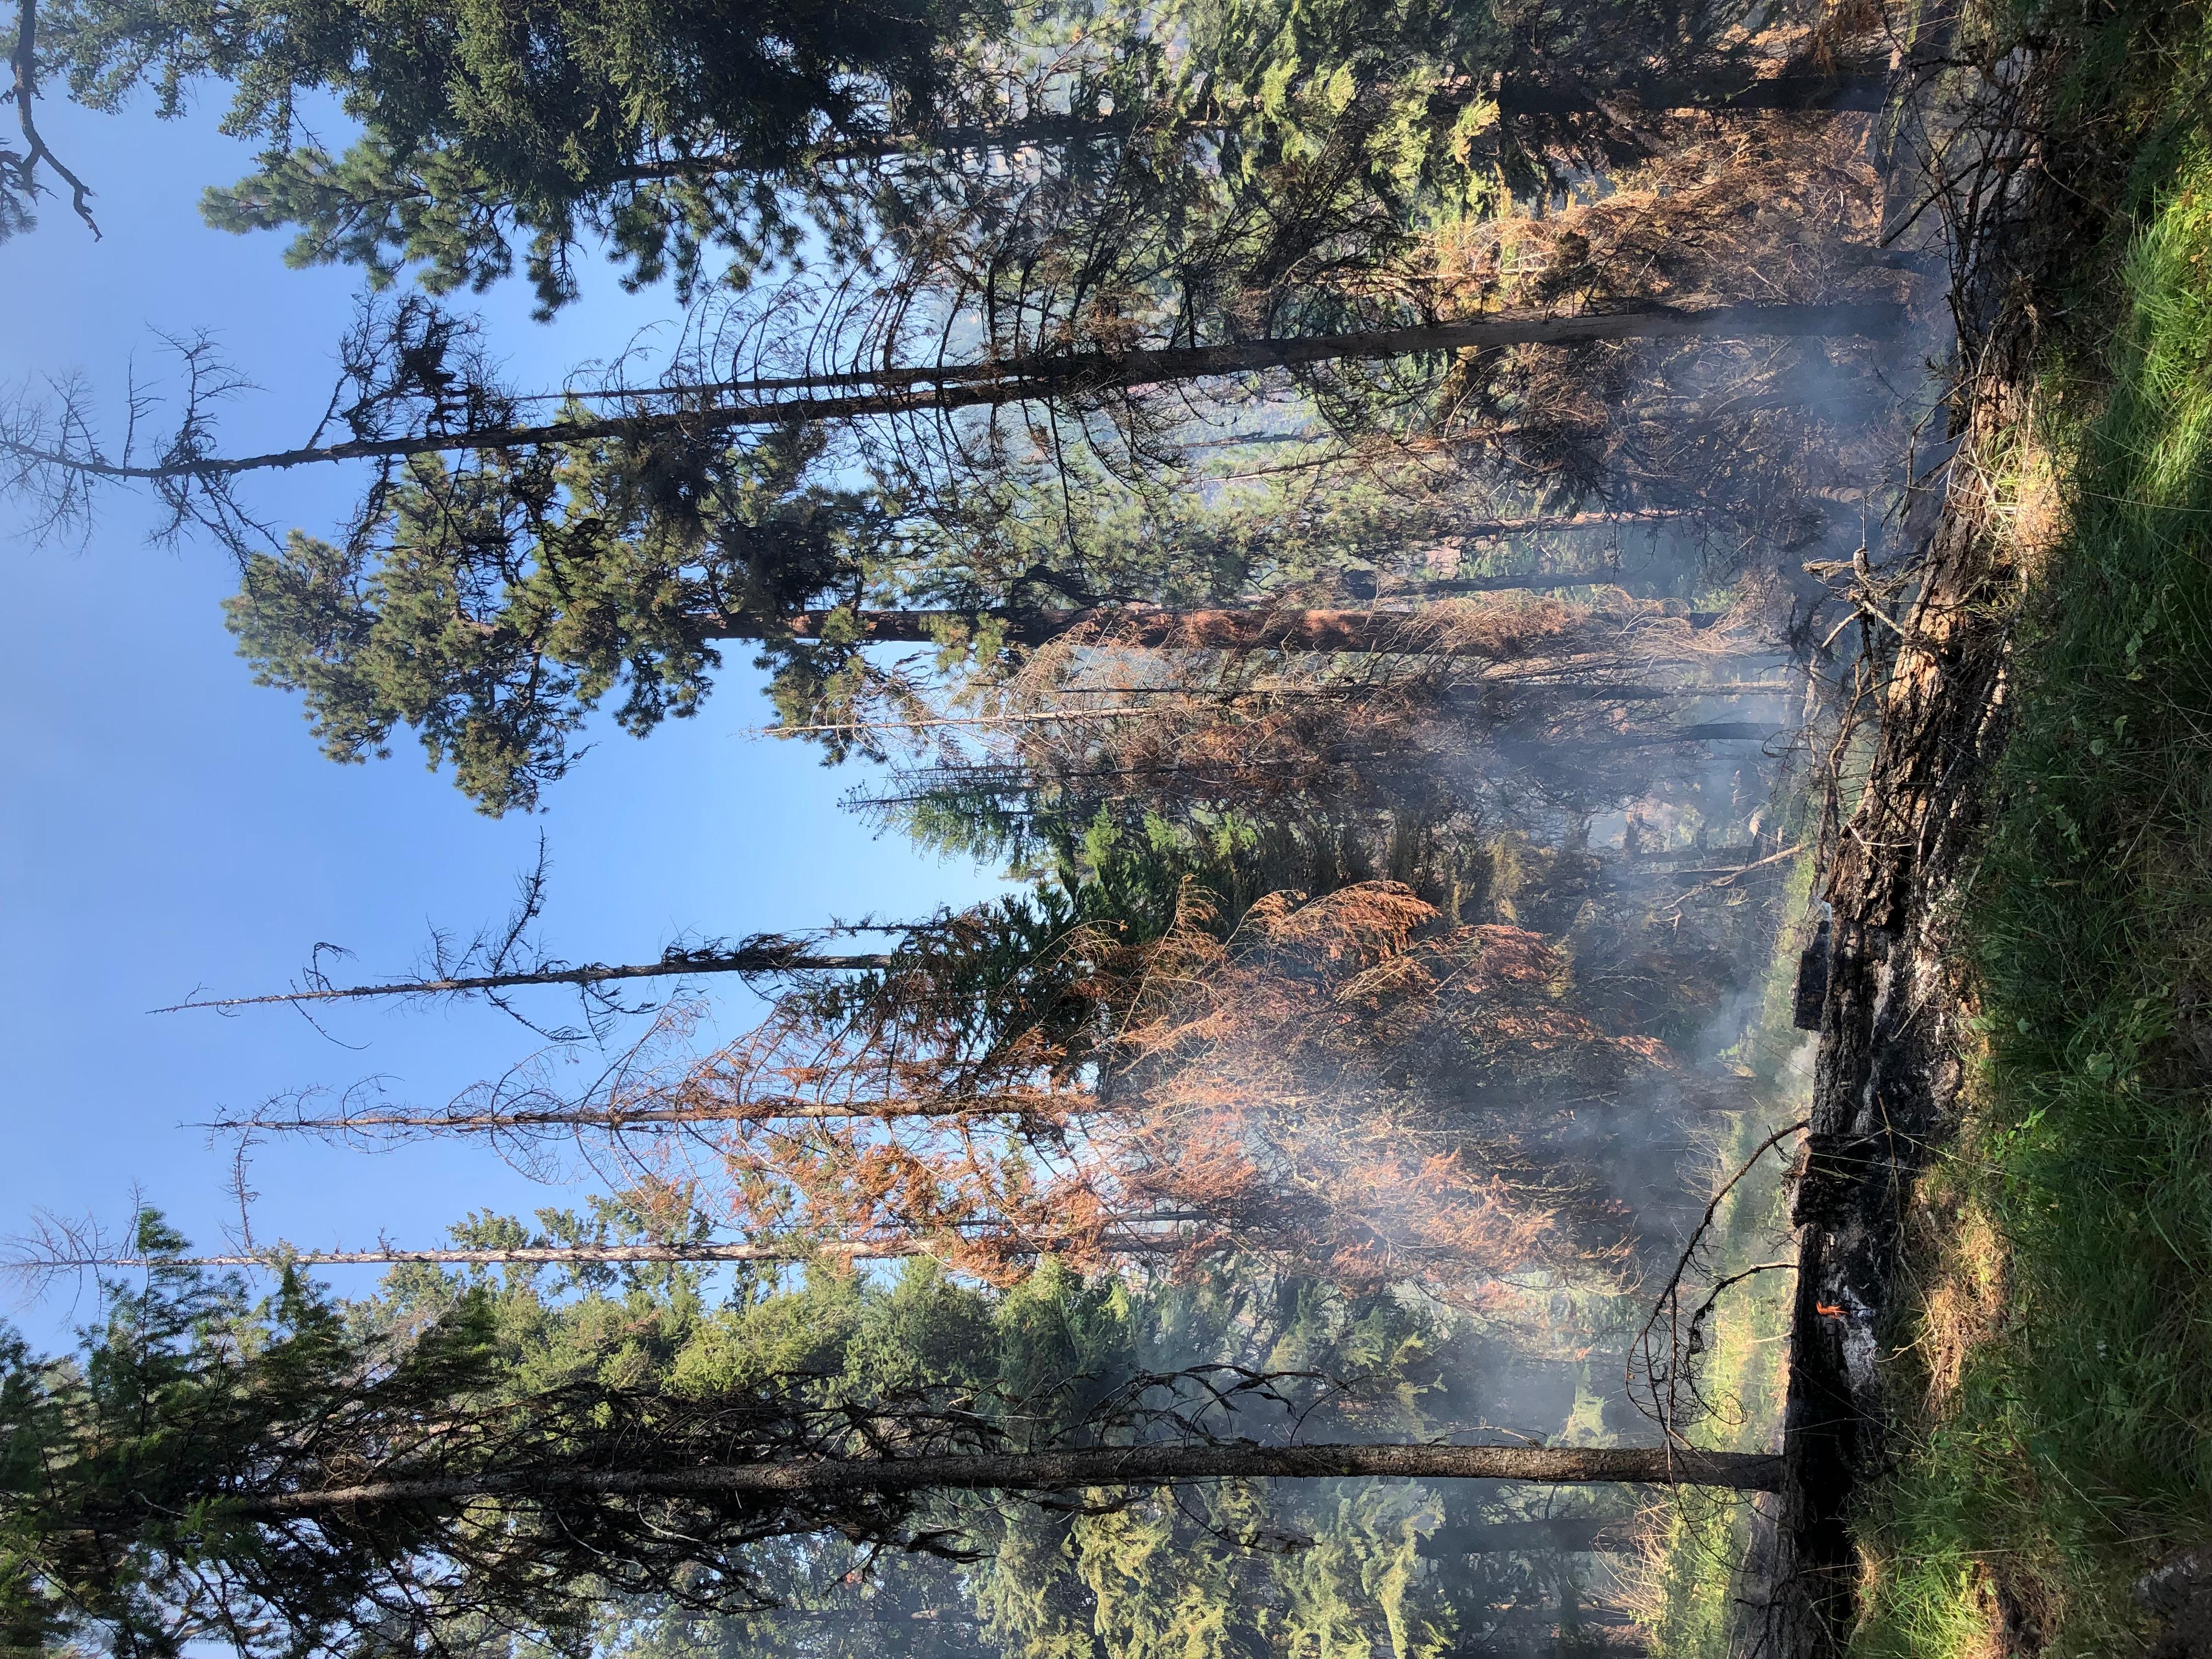 Image of trees in the forest on fire